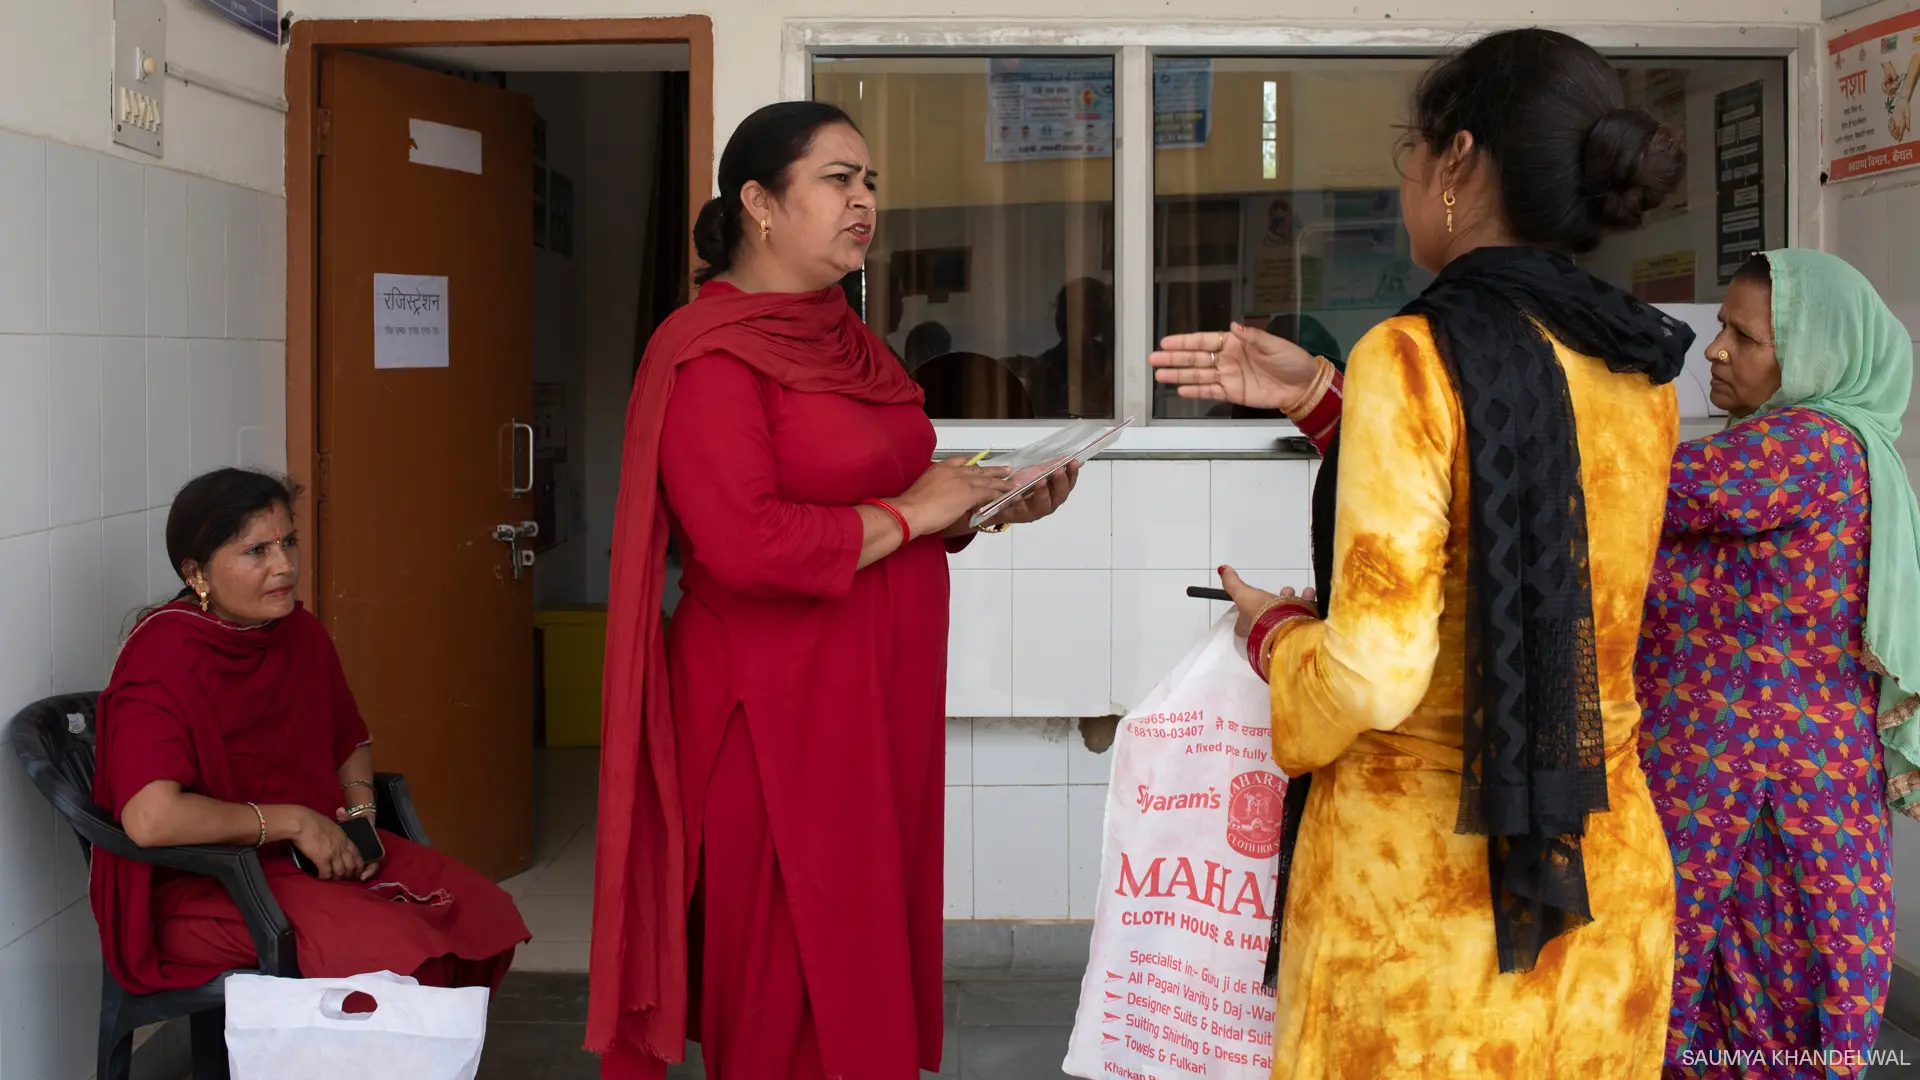 A woman directing patients at a health care center